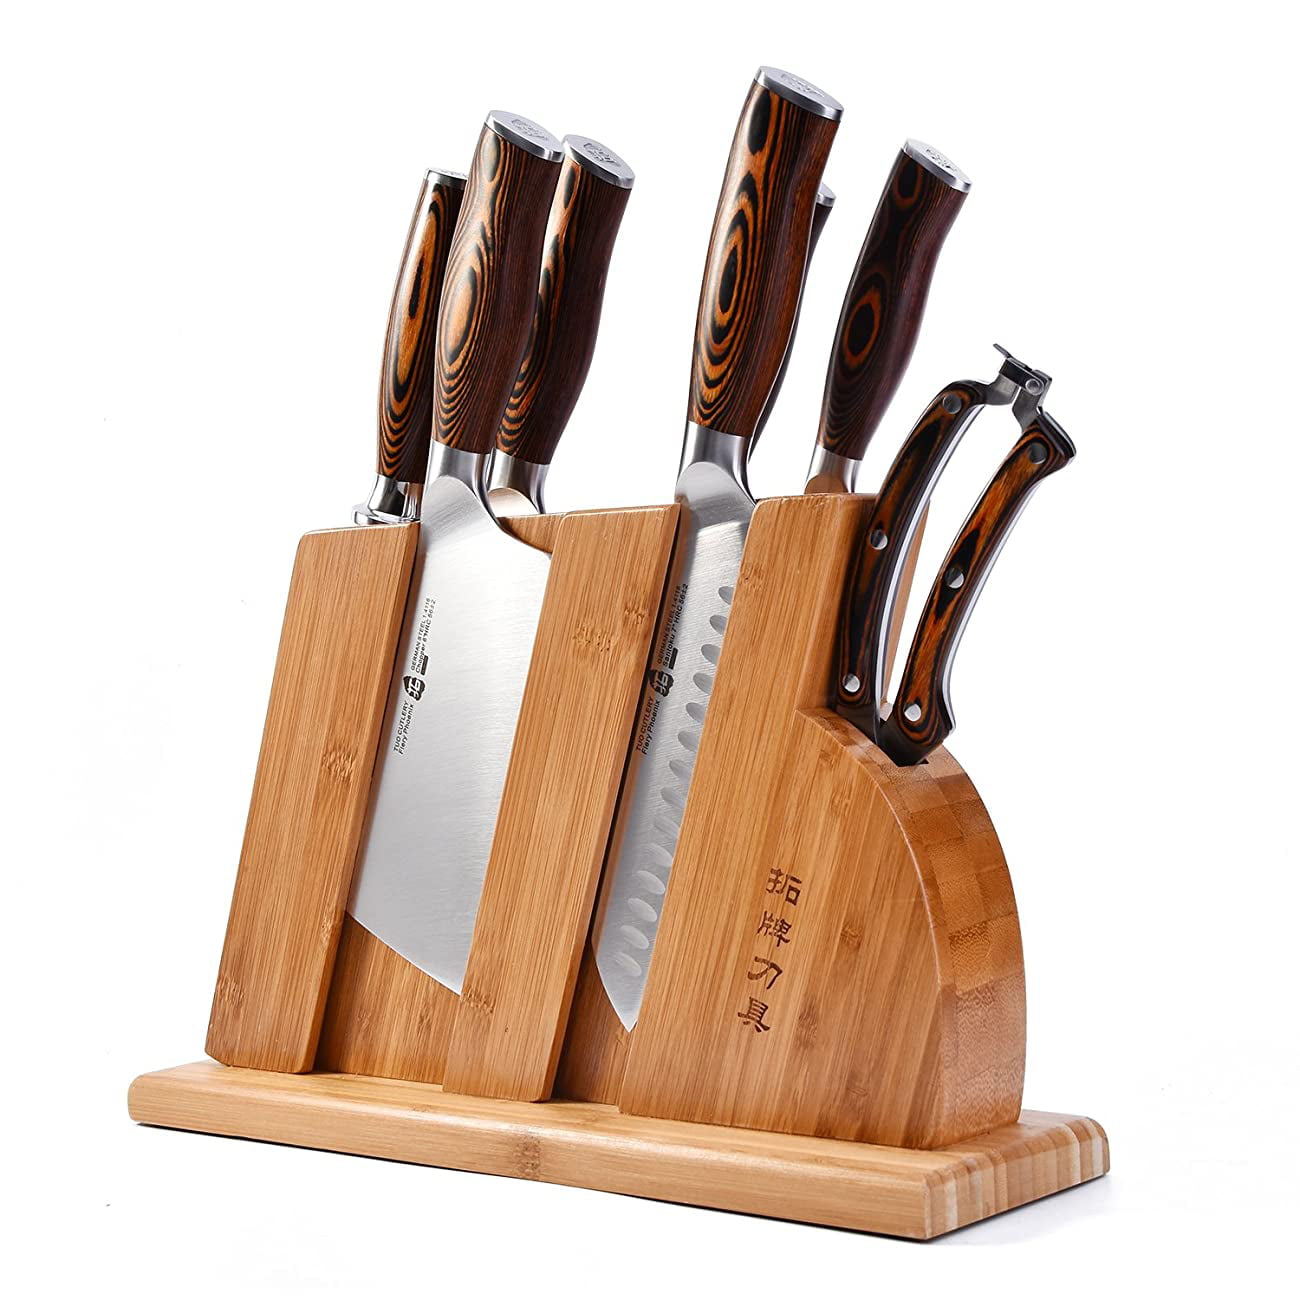 Mifiatin 5 Piece Knife Set with Wooden Box, Professional Kitchen Chef's  Knives, Chef Knife Set, Rust-proof For Home and Restaurant Use，Easy to clean